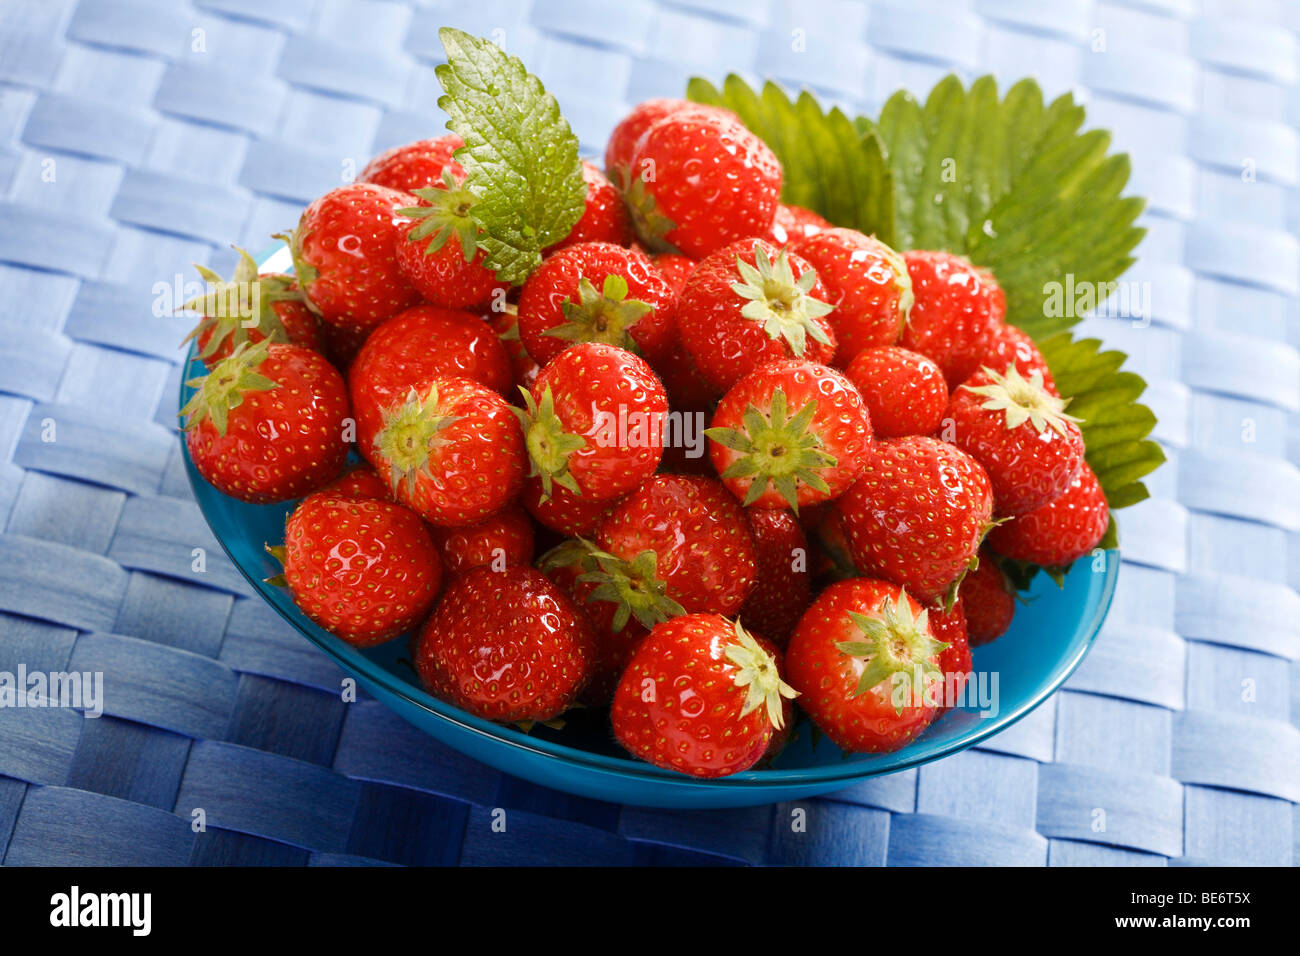 Strawberries in a bowl Stock Photo